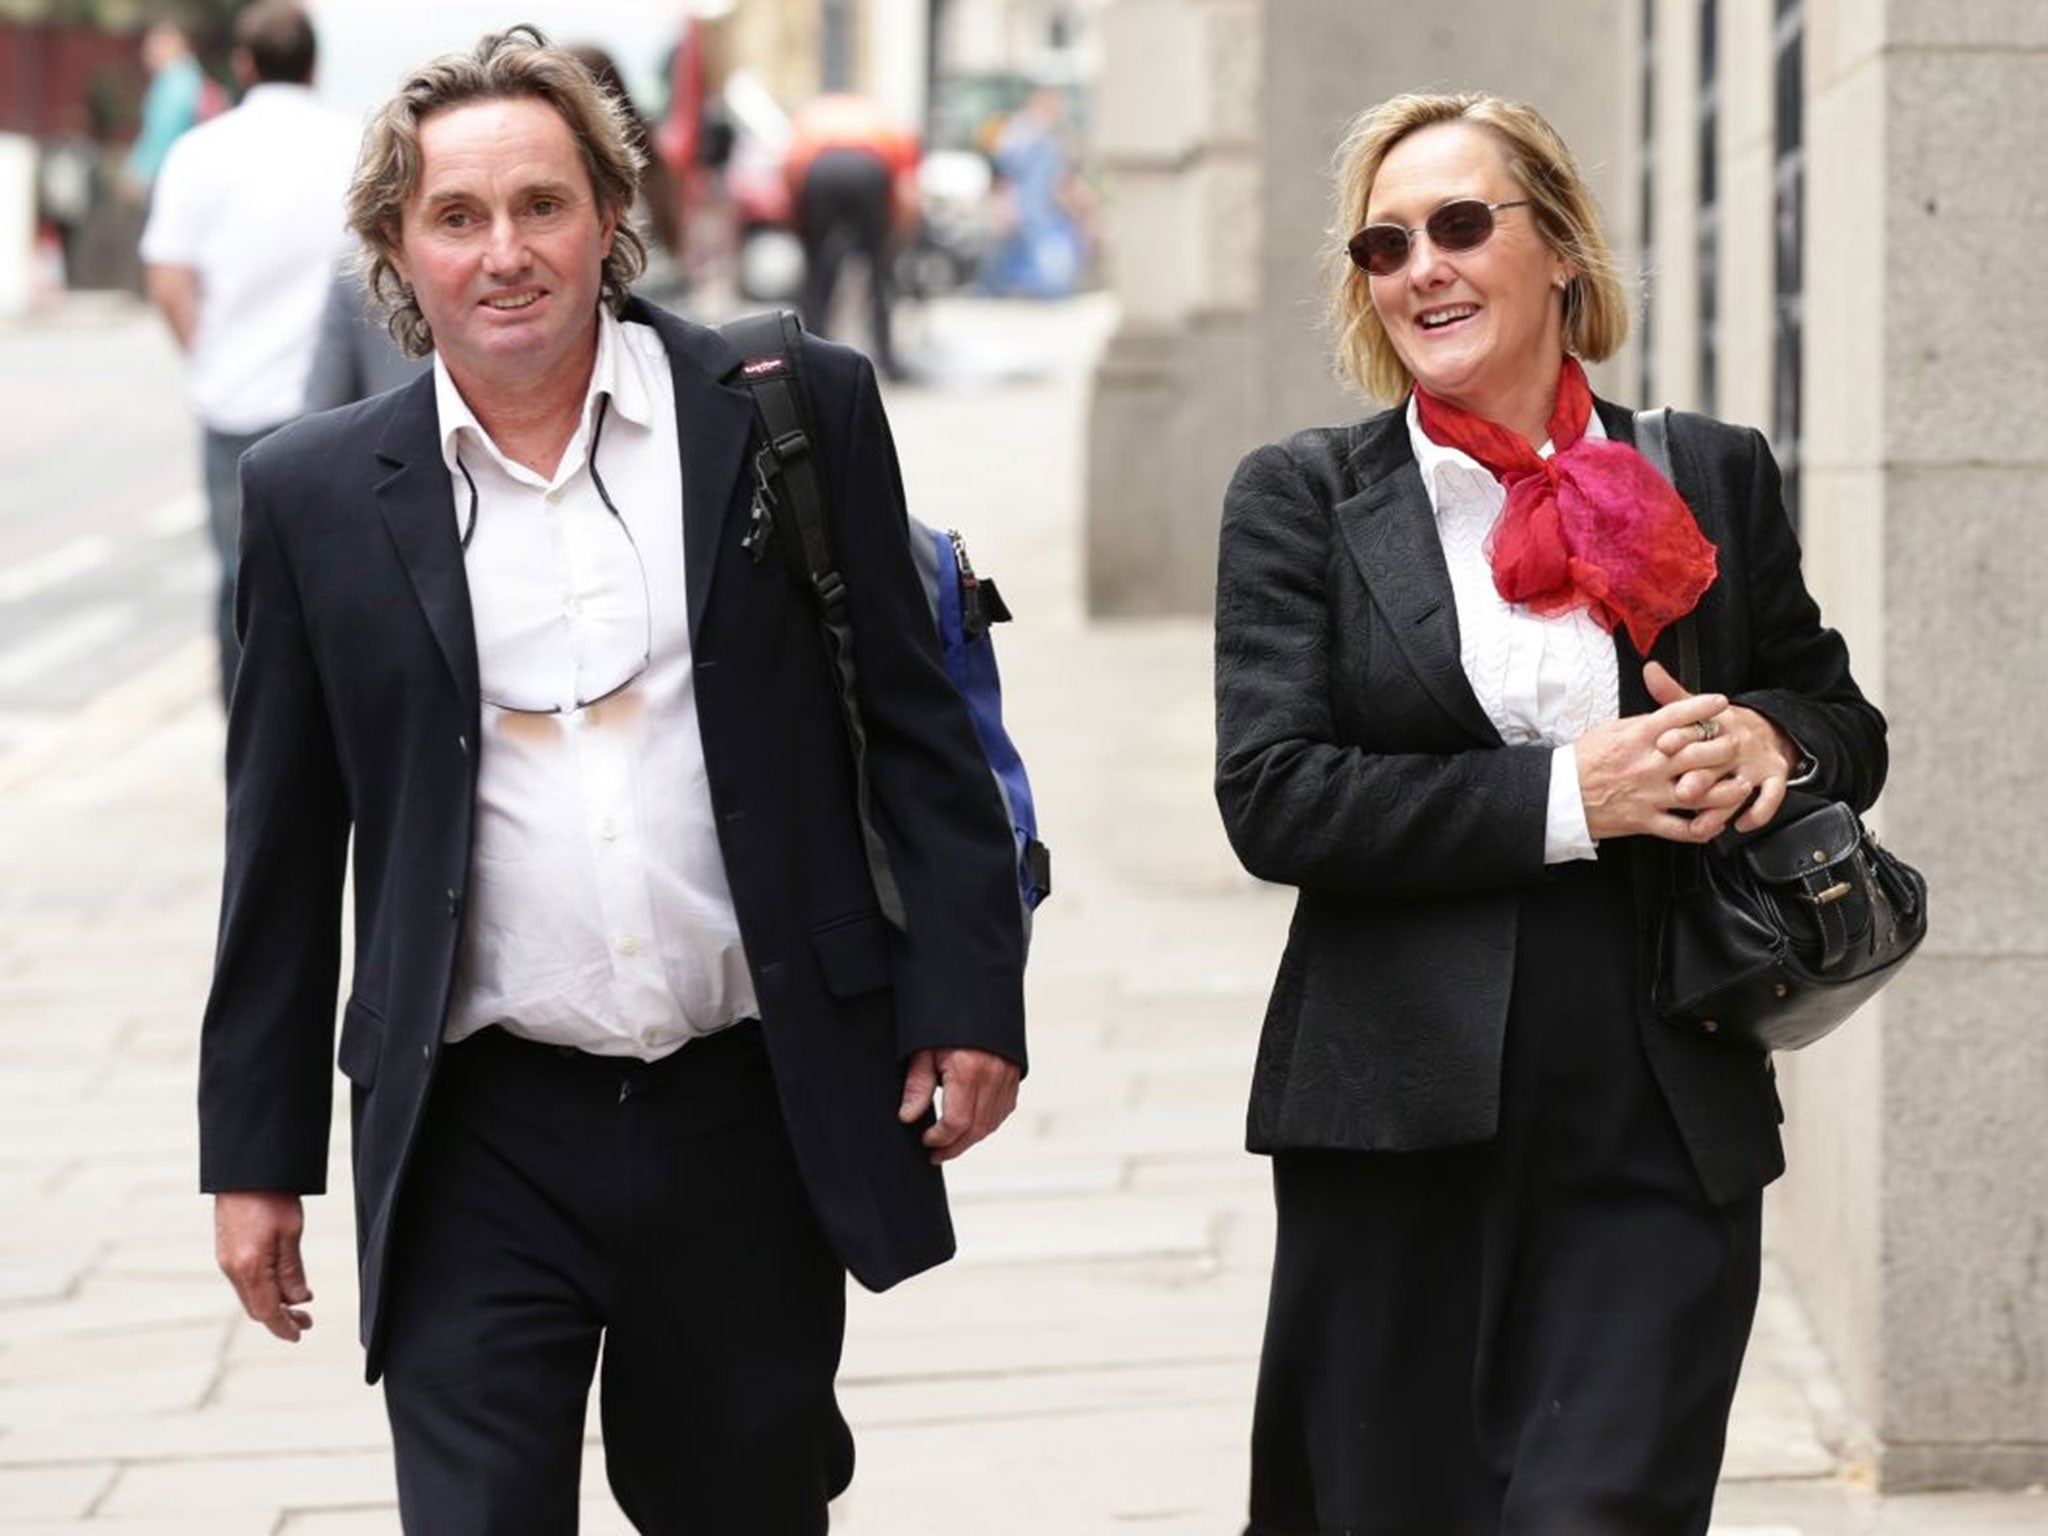 Simon Murphy, 48, and Lisanne Beck, 47, who have been found guilty of outraging public decency by indulging in a sex act during a crowded BBC Radio 2 concert in Hyde Park.